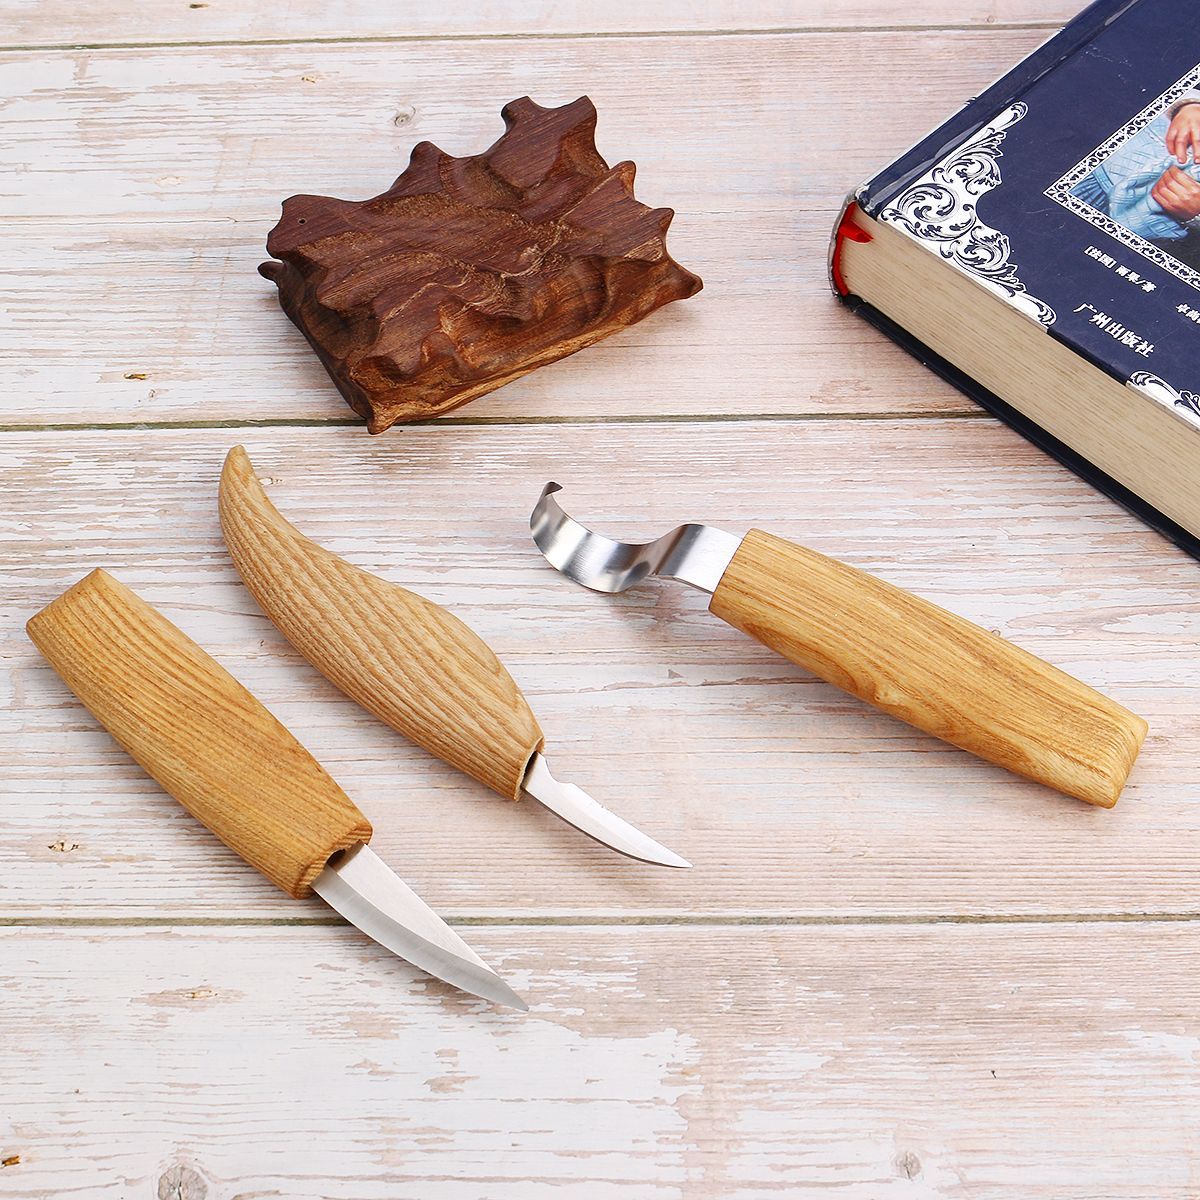 Woodcarving-Cutter-Woodwork-Carving-Knive-TOP-SET-Sculptural-DIY-Spoon-Carving-Knive-Tool-Whittling--1664628